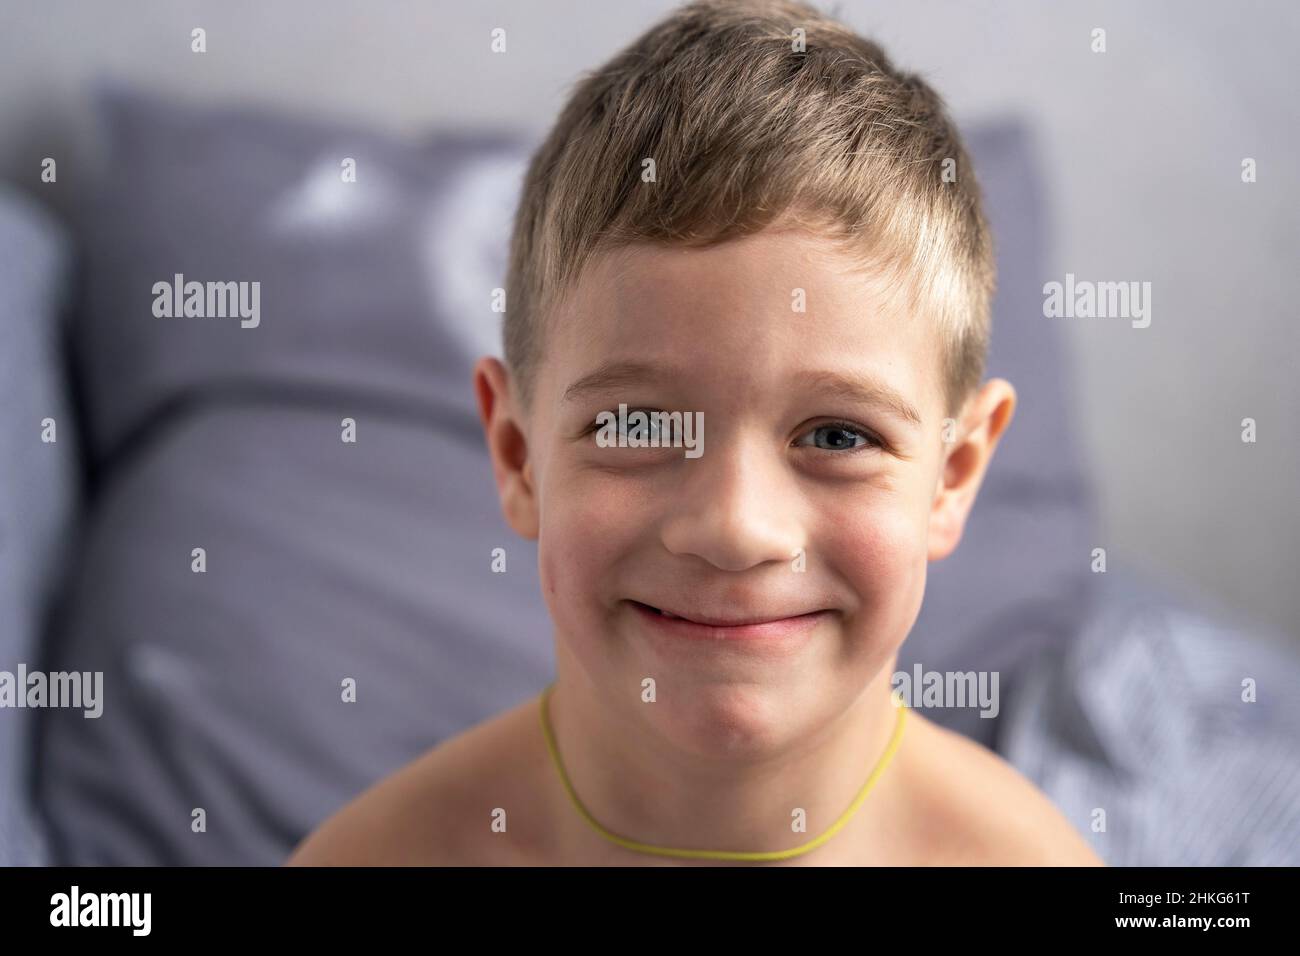 Portrait of a smiling cute Caucasian boy 5 years old who has just woken up and is sitting on the bed. Funny boy looks merrily at the camera Stock Photo